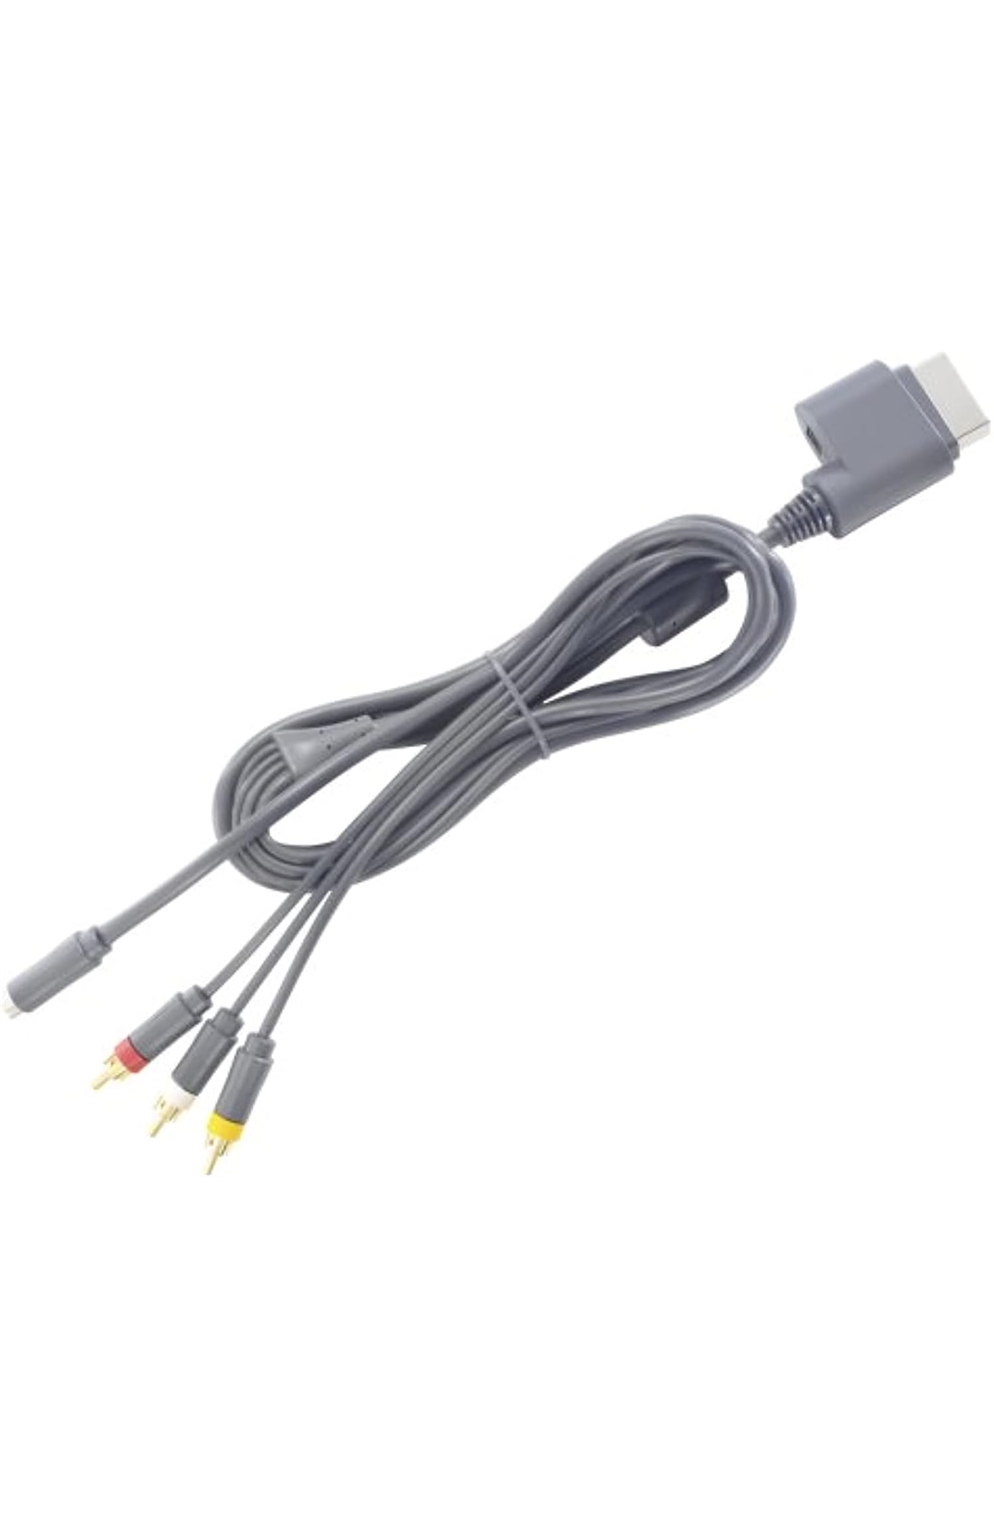 Xbox 360 - Cable - S-Video Av Cable